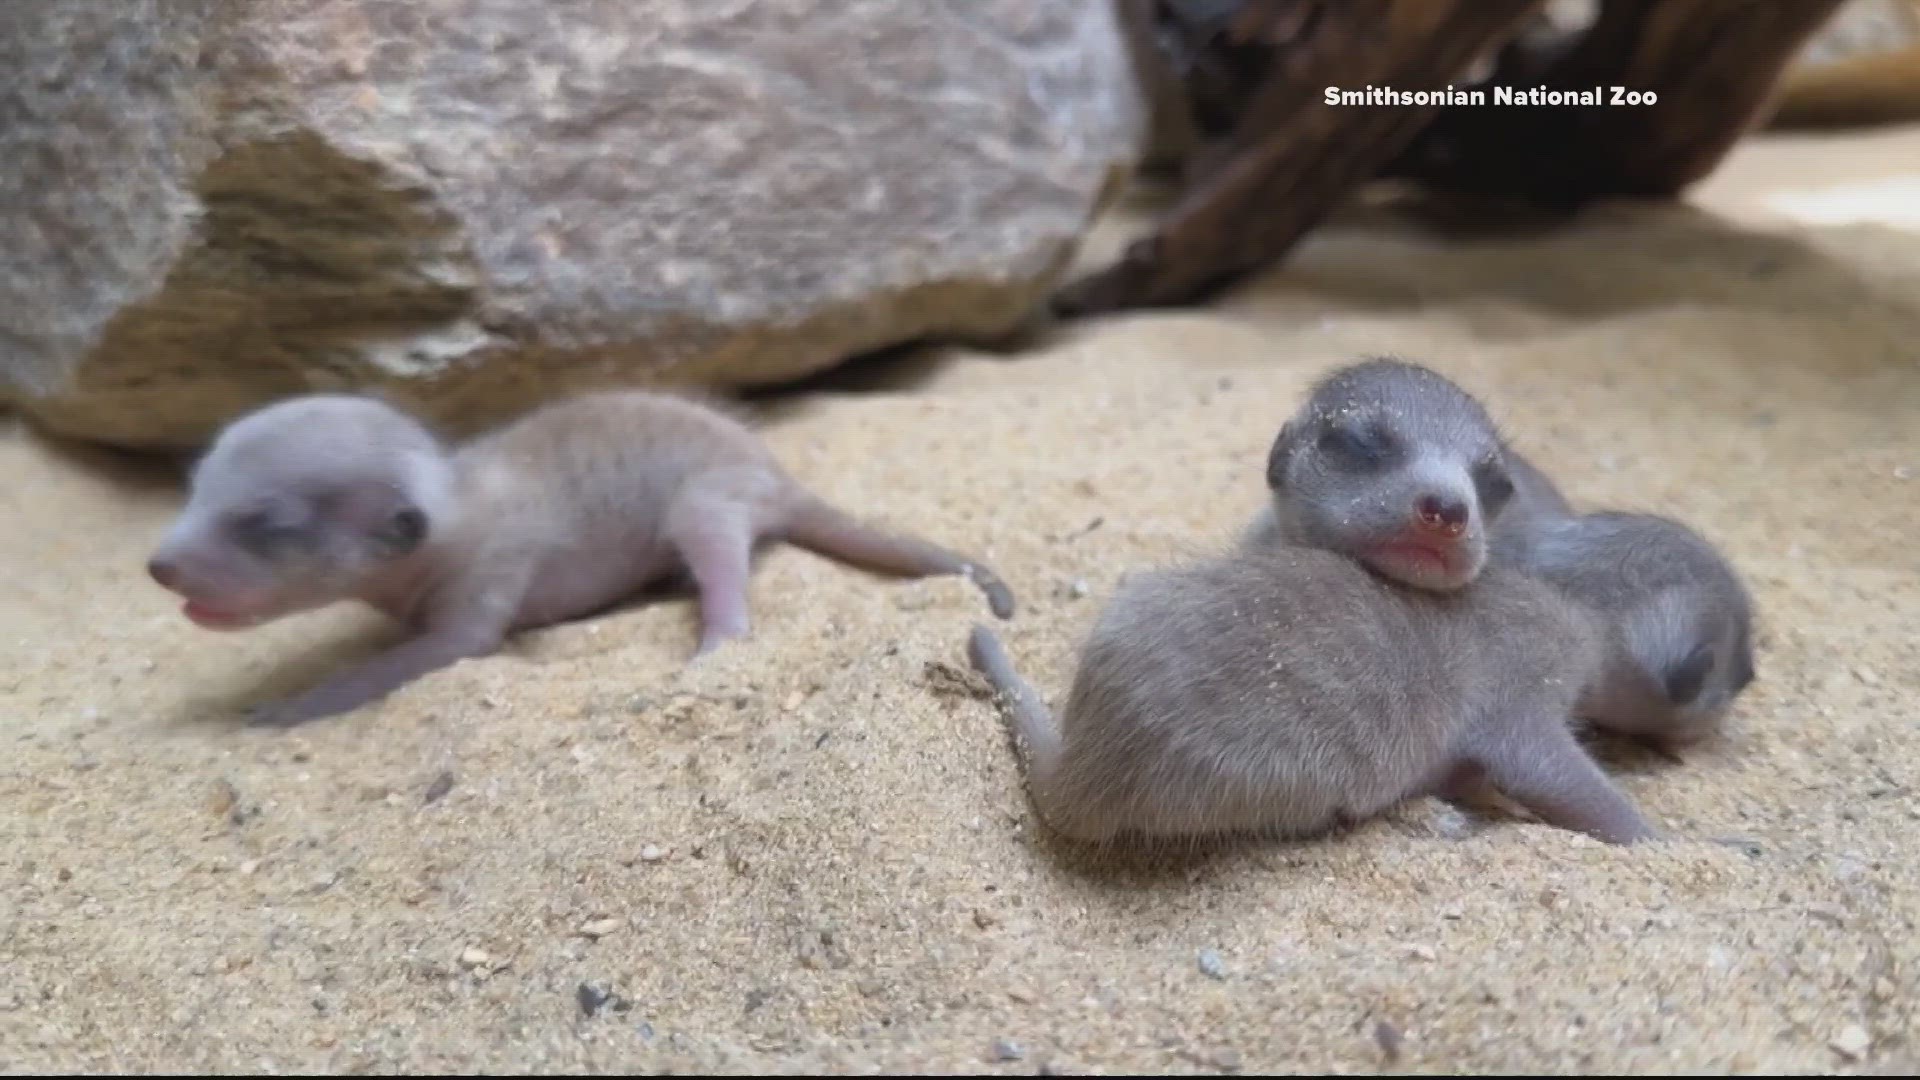 For the first time in 16 years, three meerkat pups were born at the zoo.